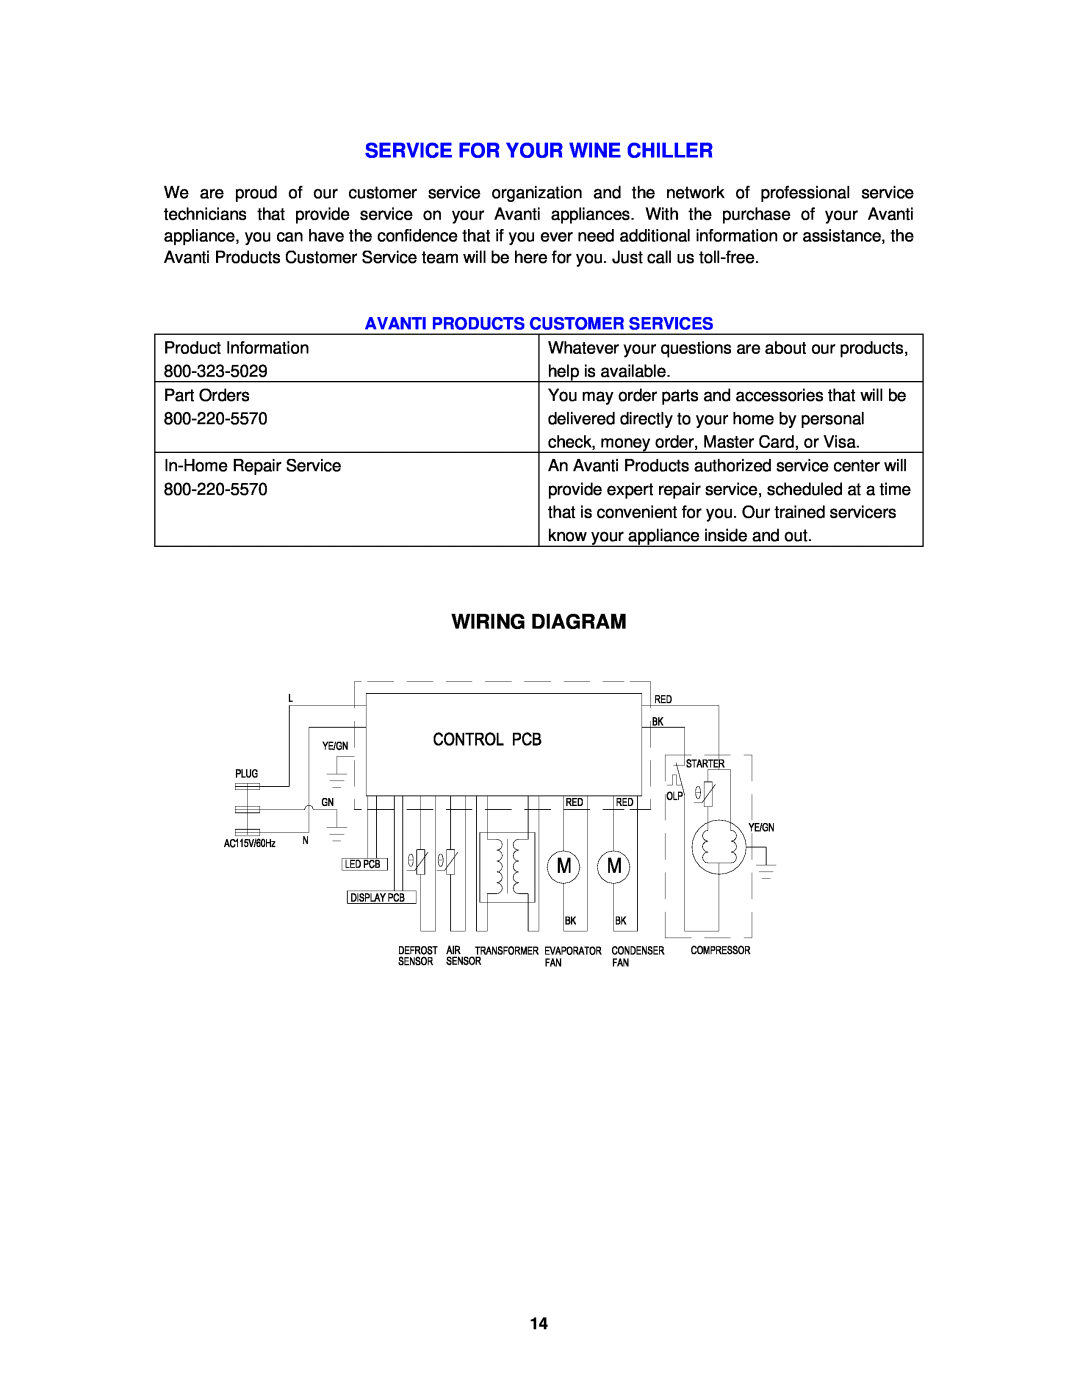 Avanti WCR5403SS instruction manual Service For Your Wine Chiller, Wiring Diagram, Avanti Products Customer Services 